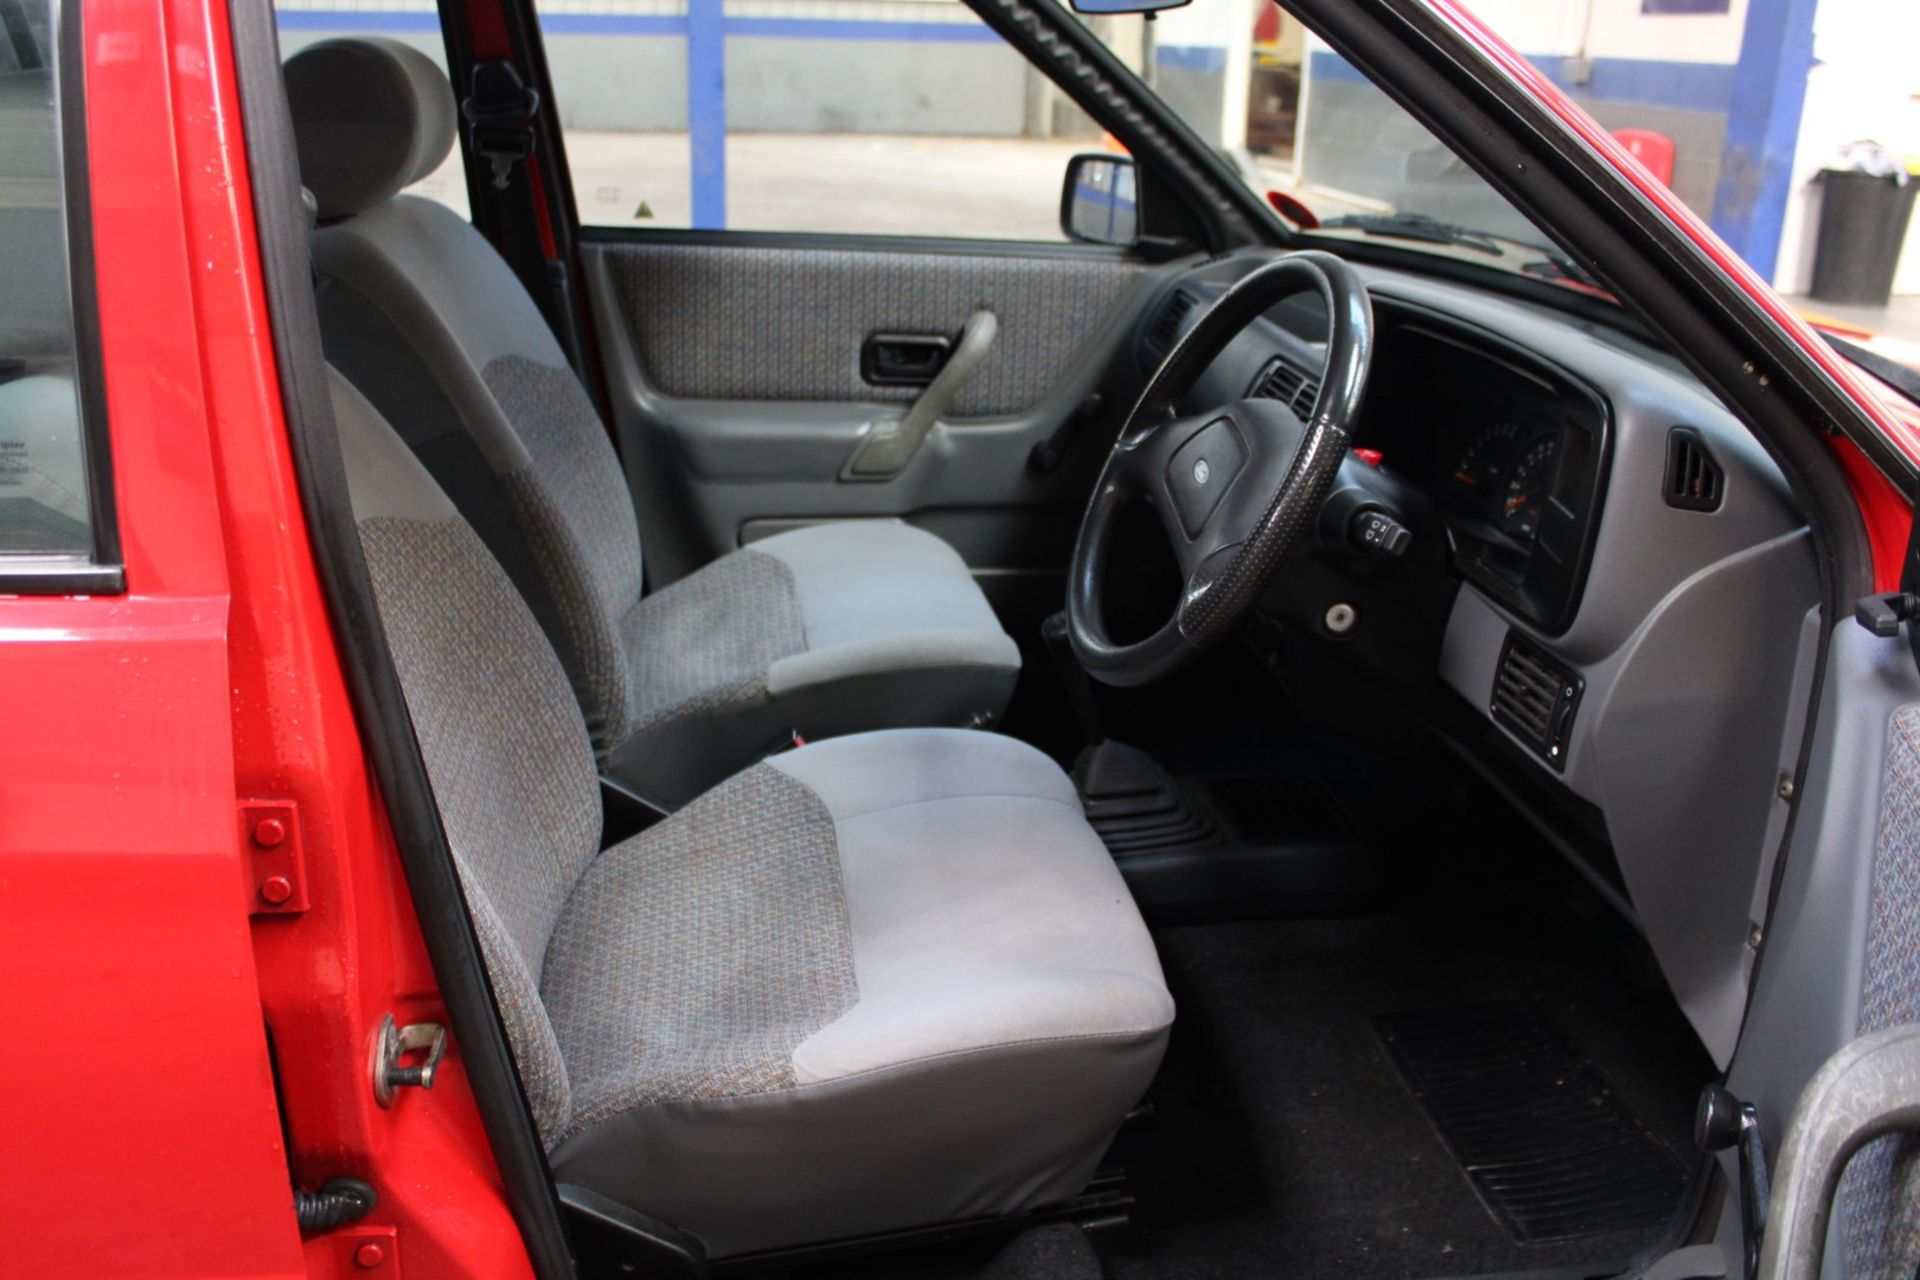 1988 Ford Escort 1.4 LX One owner from new - Image 26 of 26